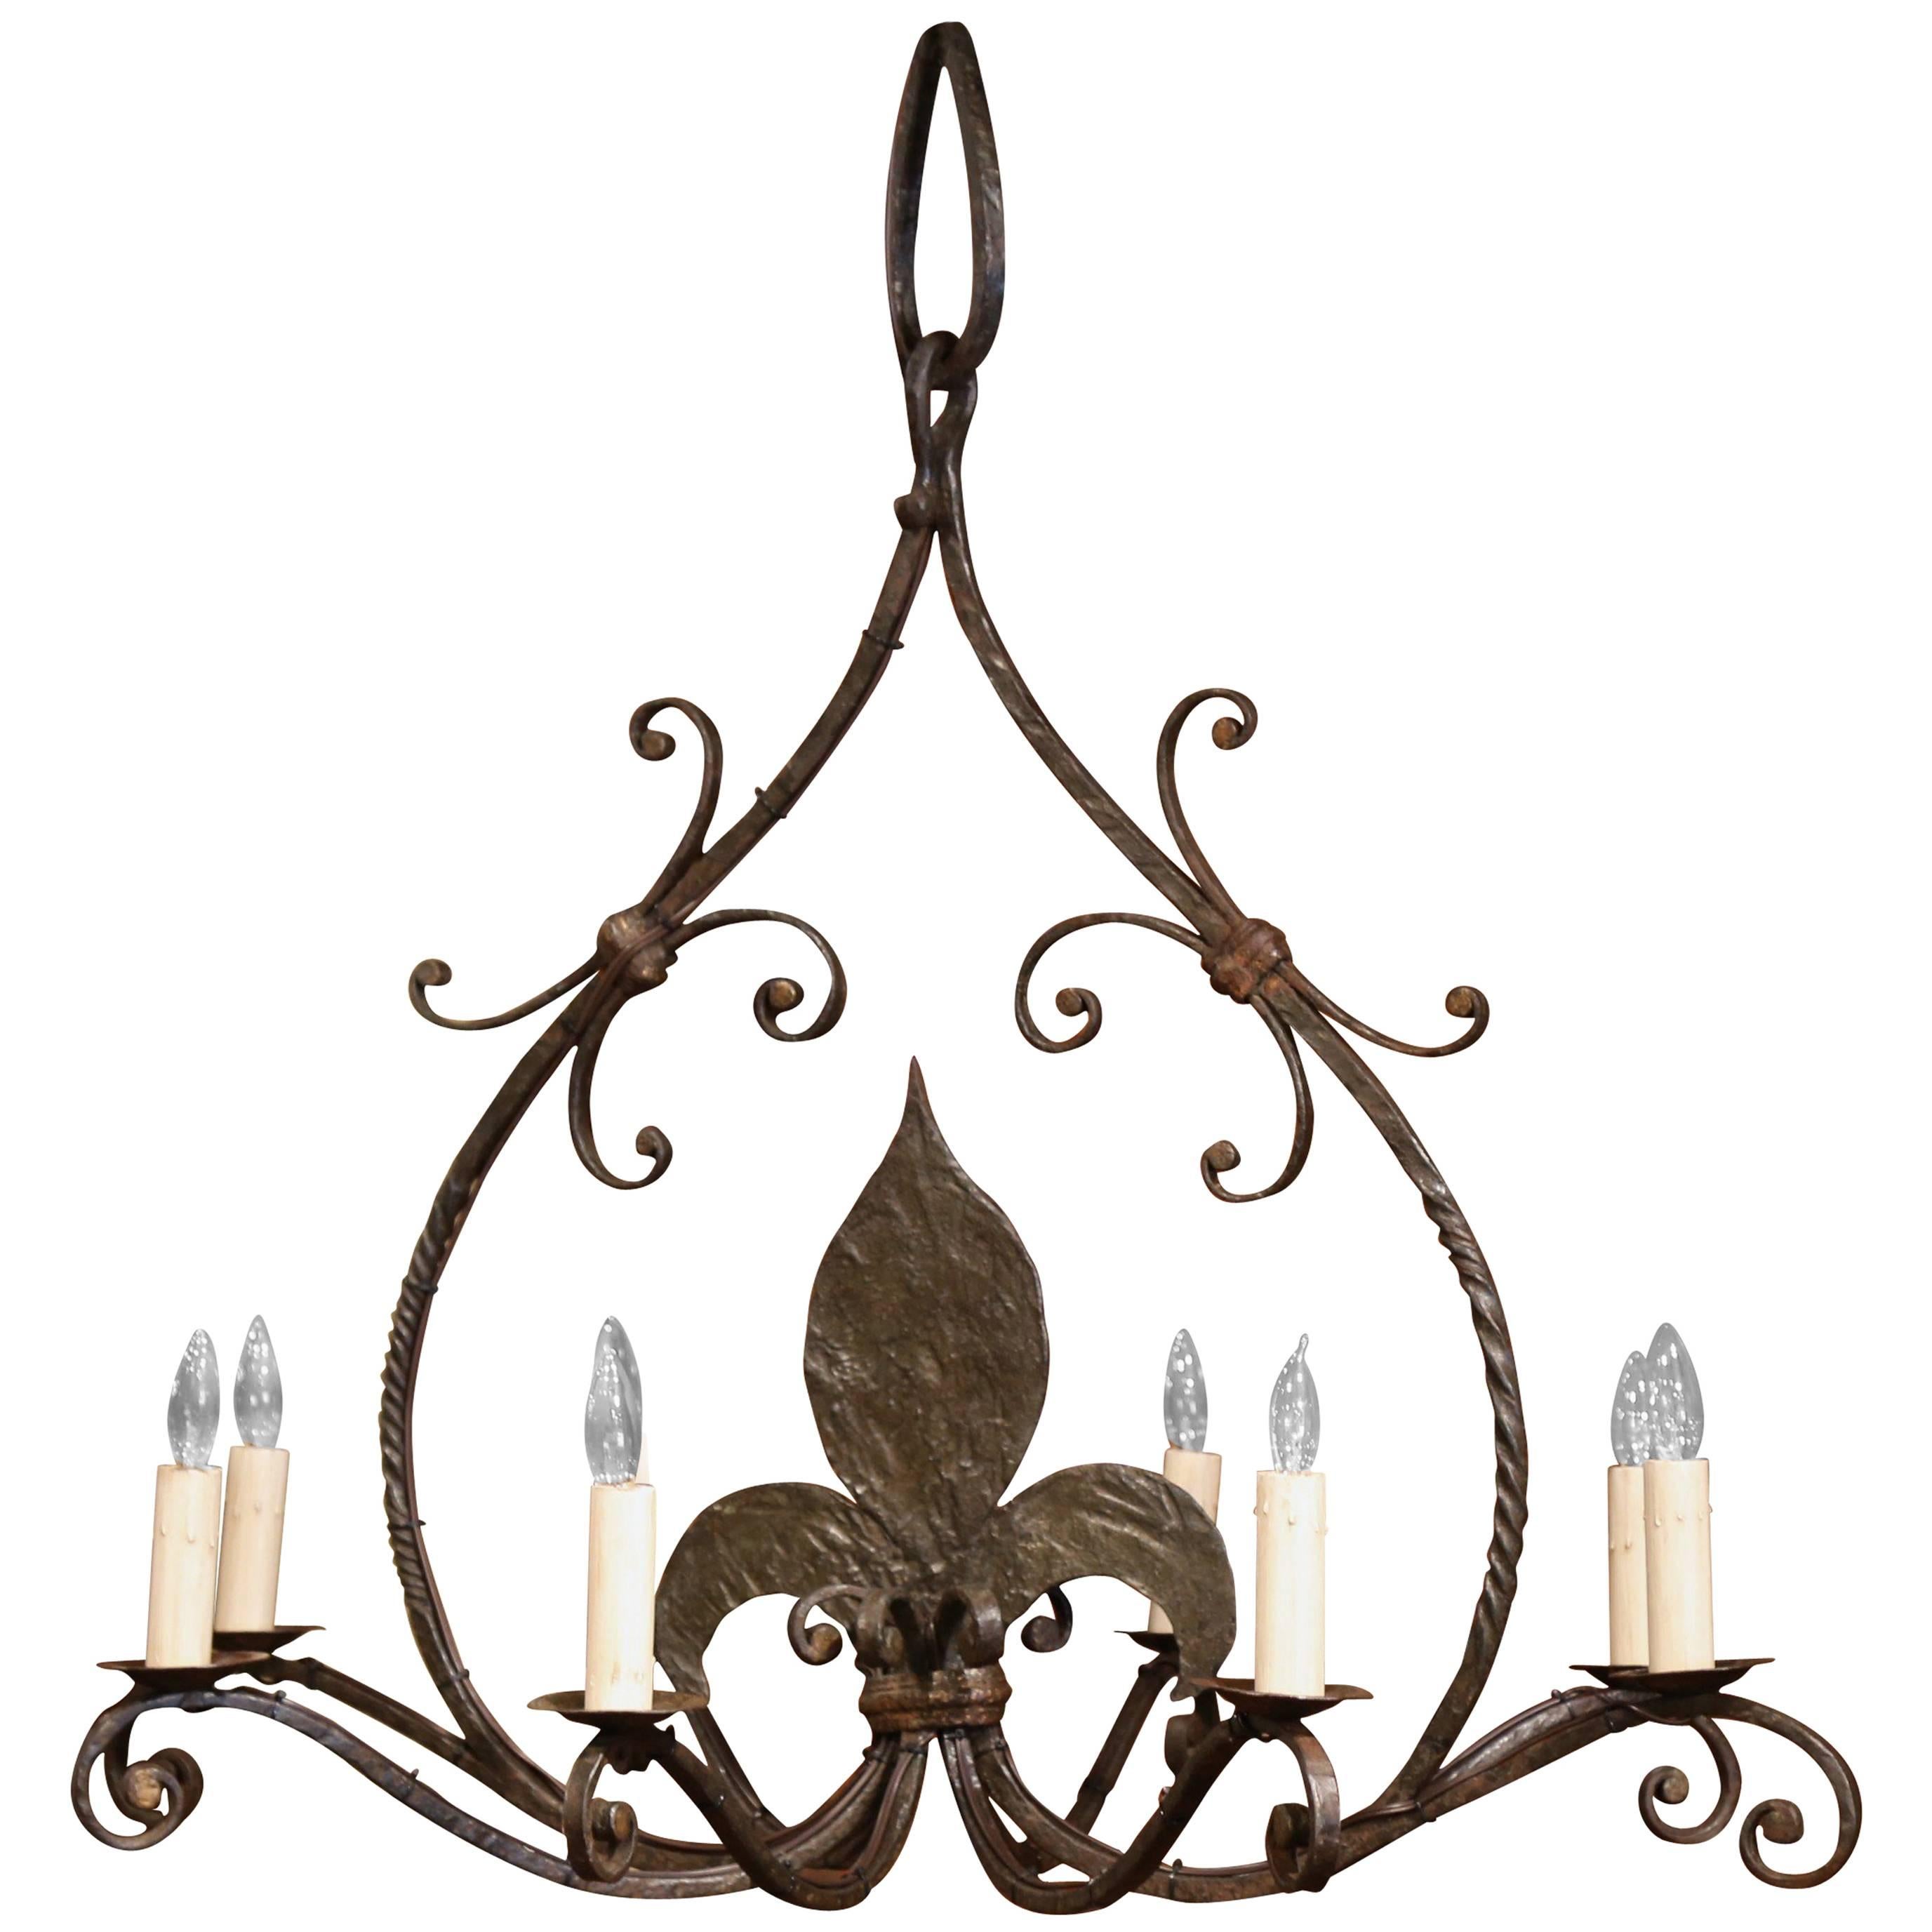 Large 19th Century French Wrought Iron Eight-Light Chandelier with Fleur-de-Lys